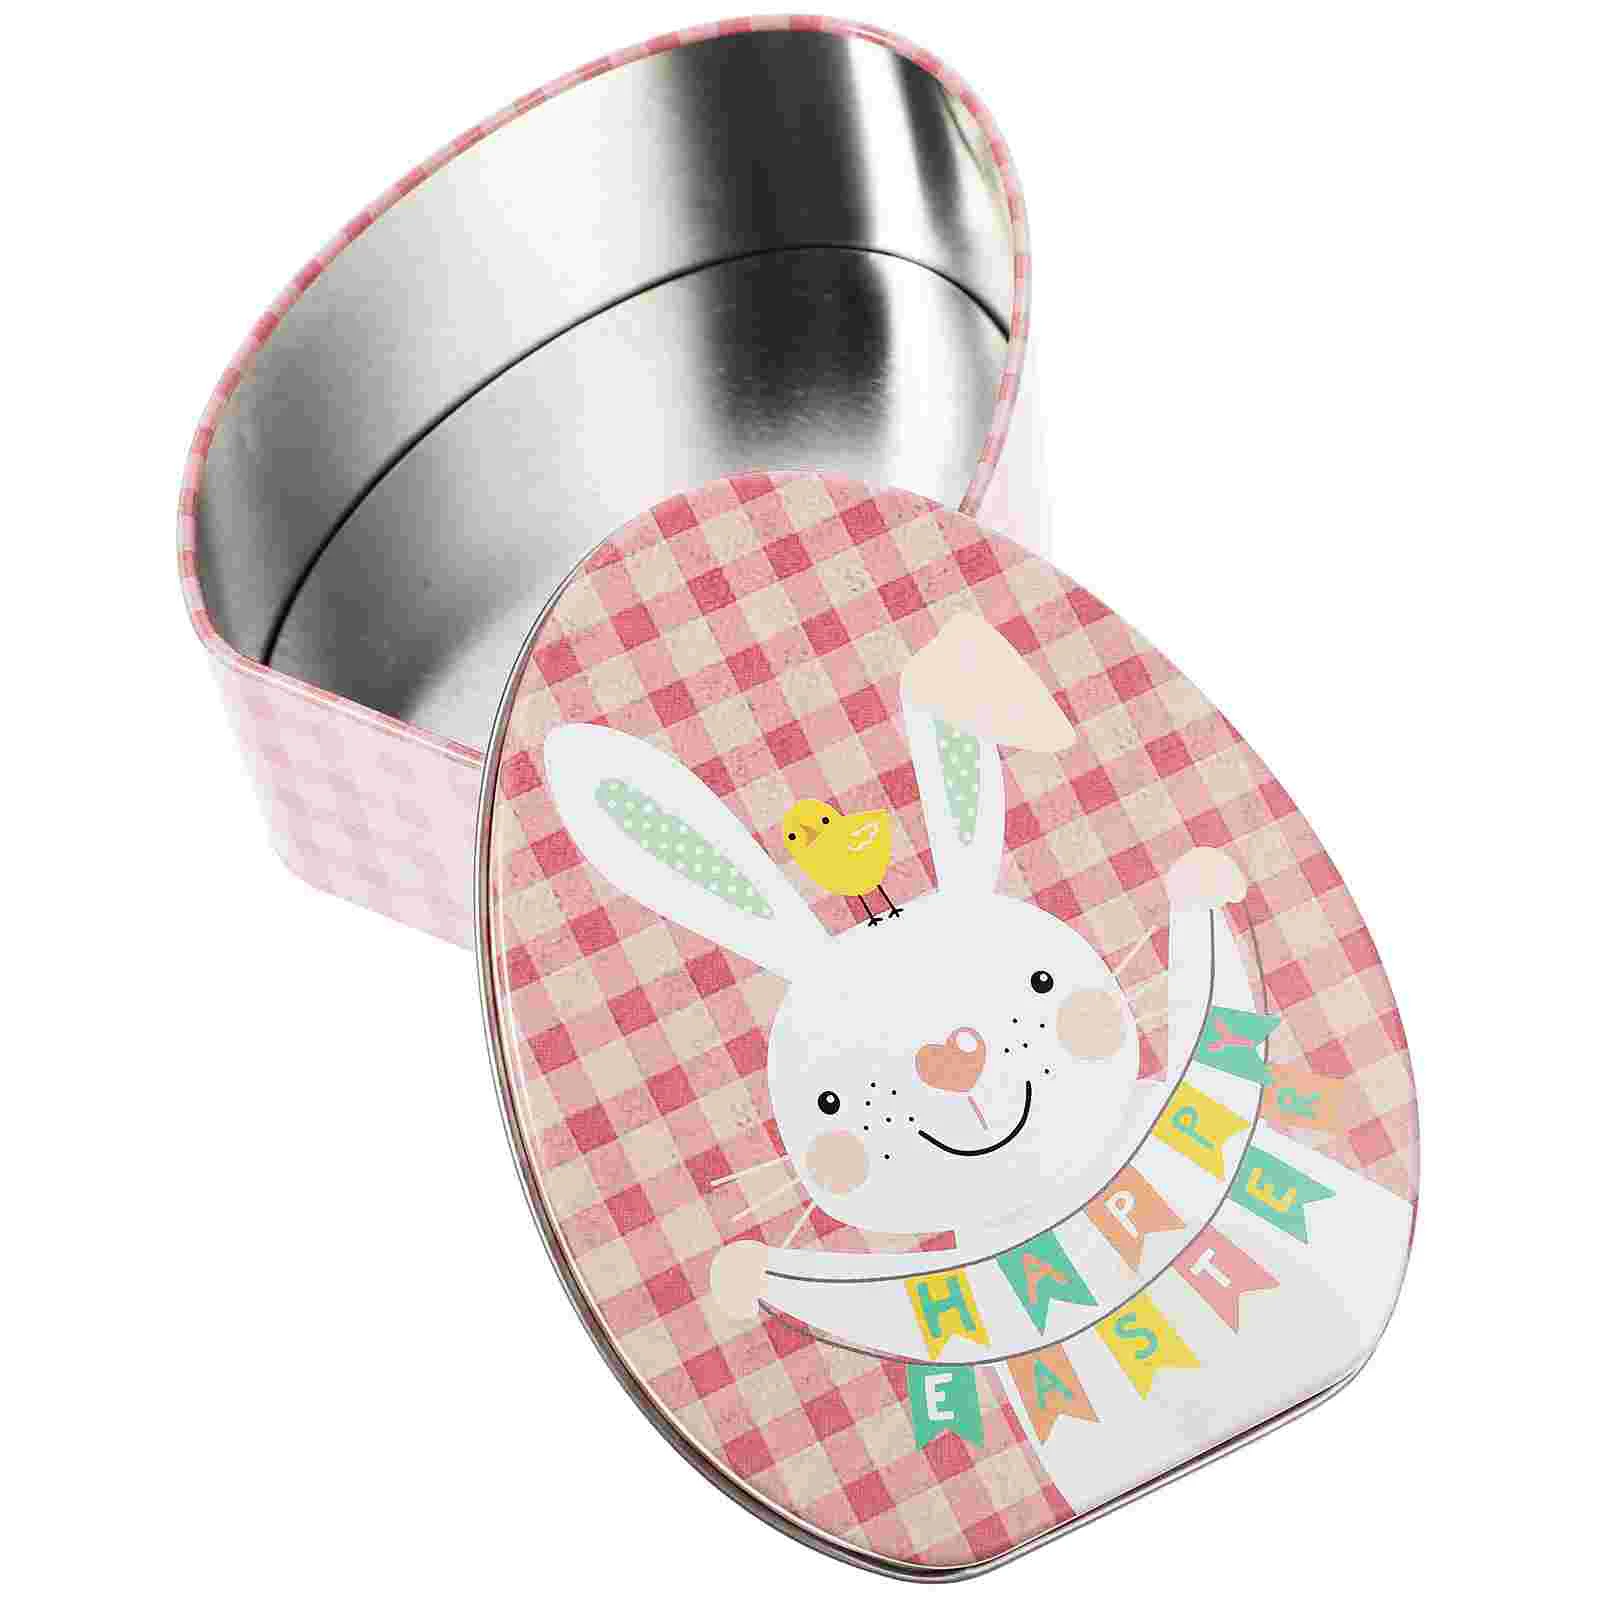 

Easter Box Tin Candy Boxes Cookie Gift Tins Tinplate Storage Bunny Metal Eggs Treat Party Lids Case Favor Empty Cookies Jar Egg